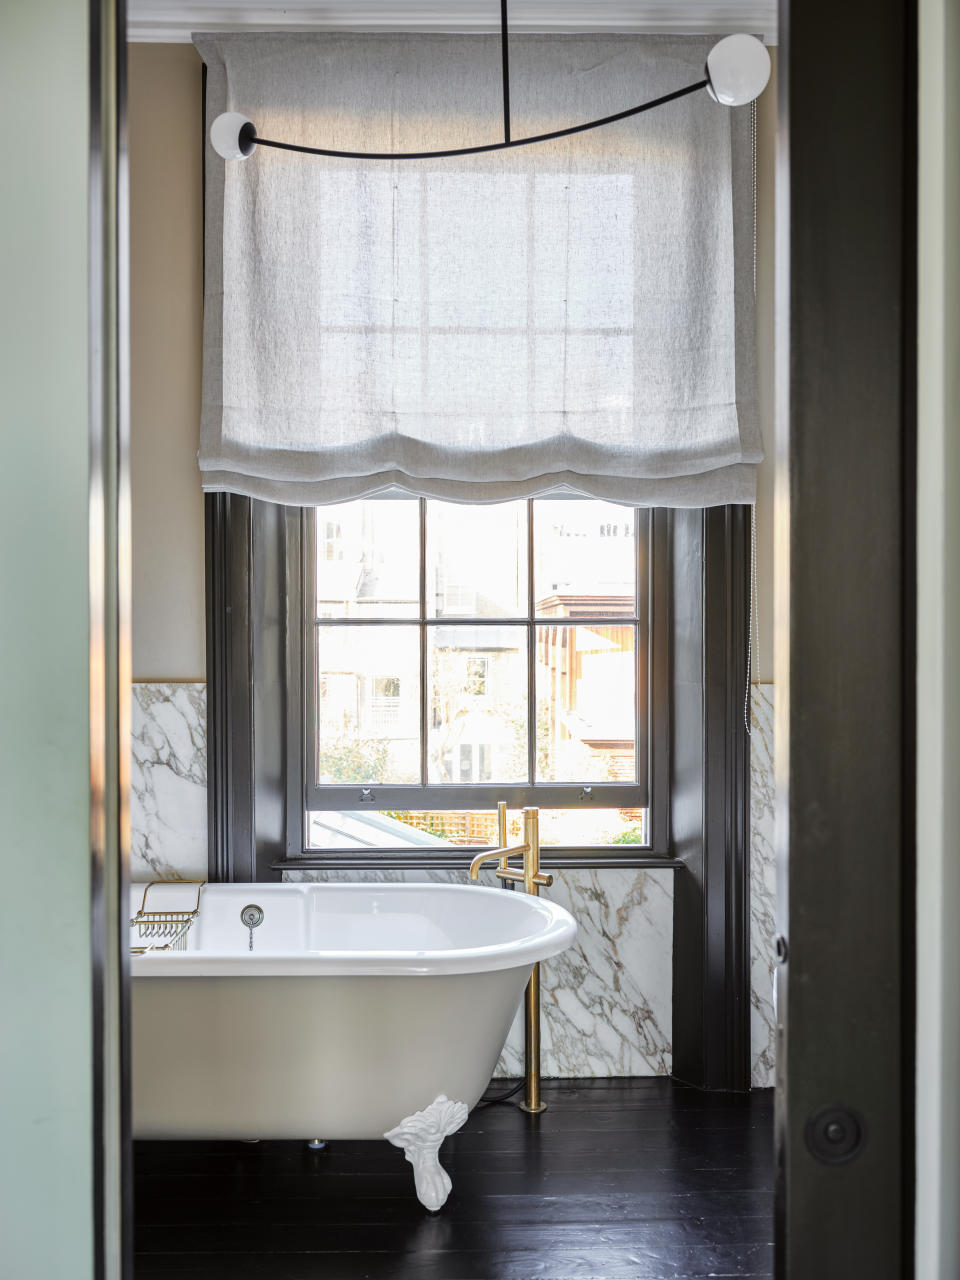 freestanding bath in dark and marble bathroom with large window